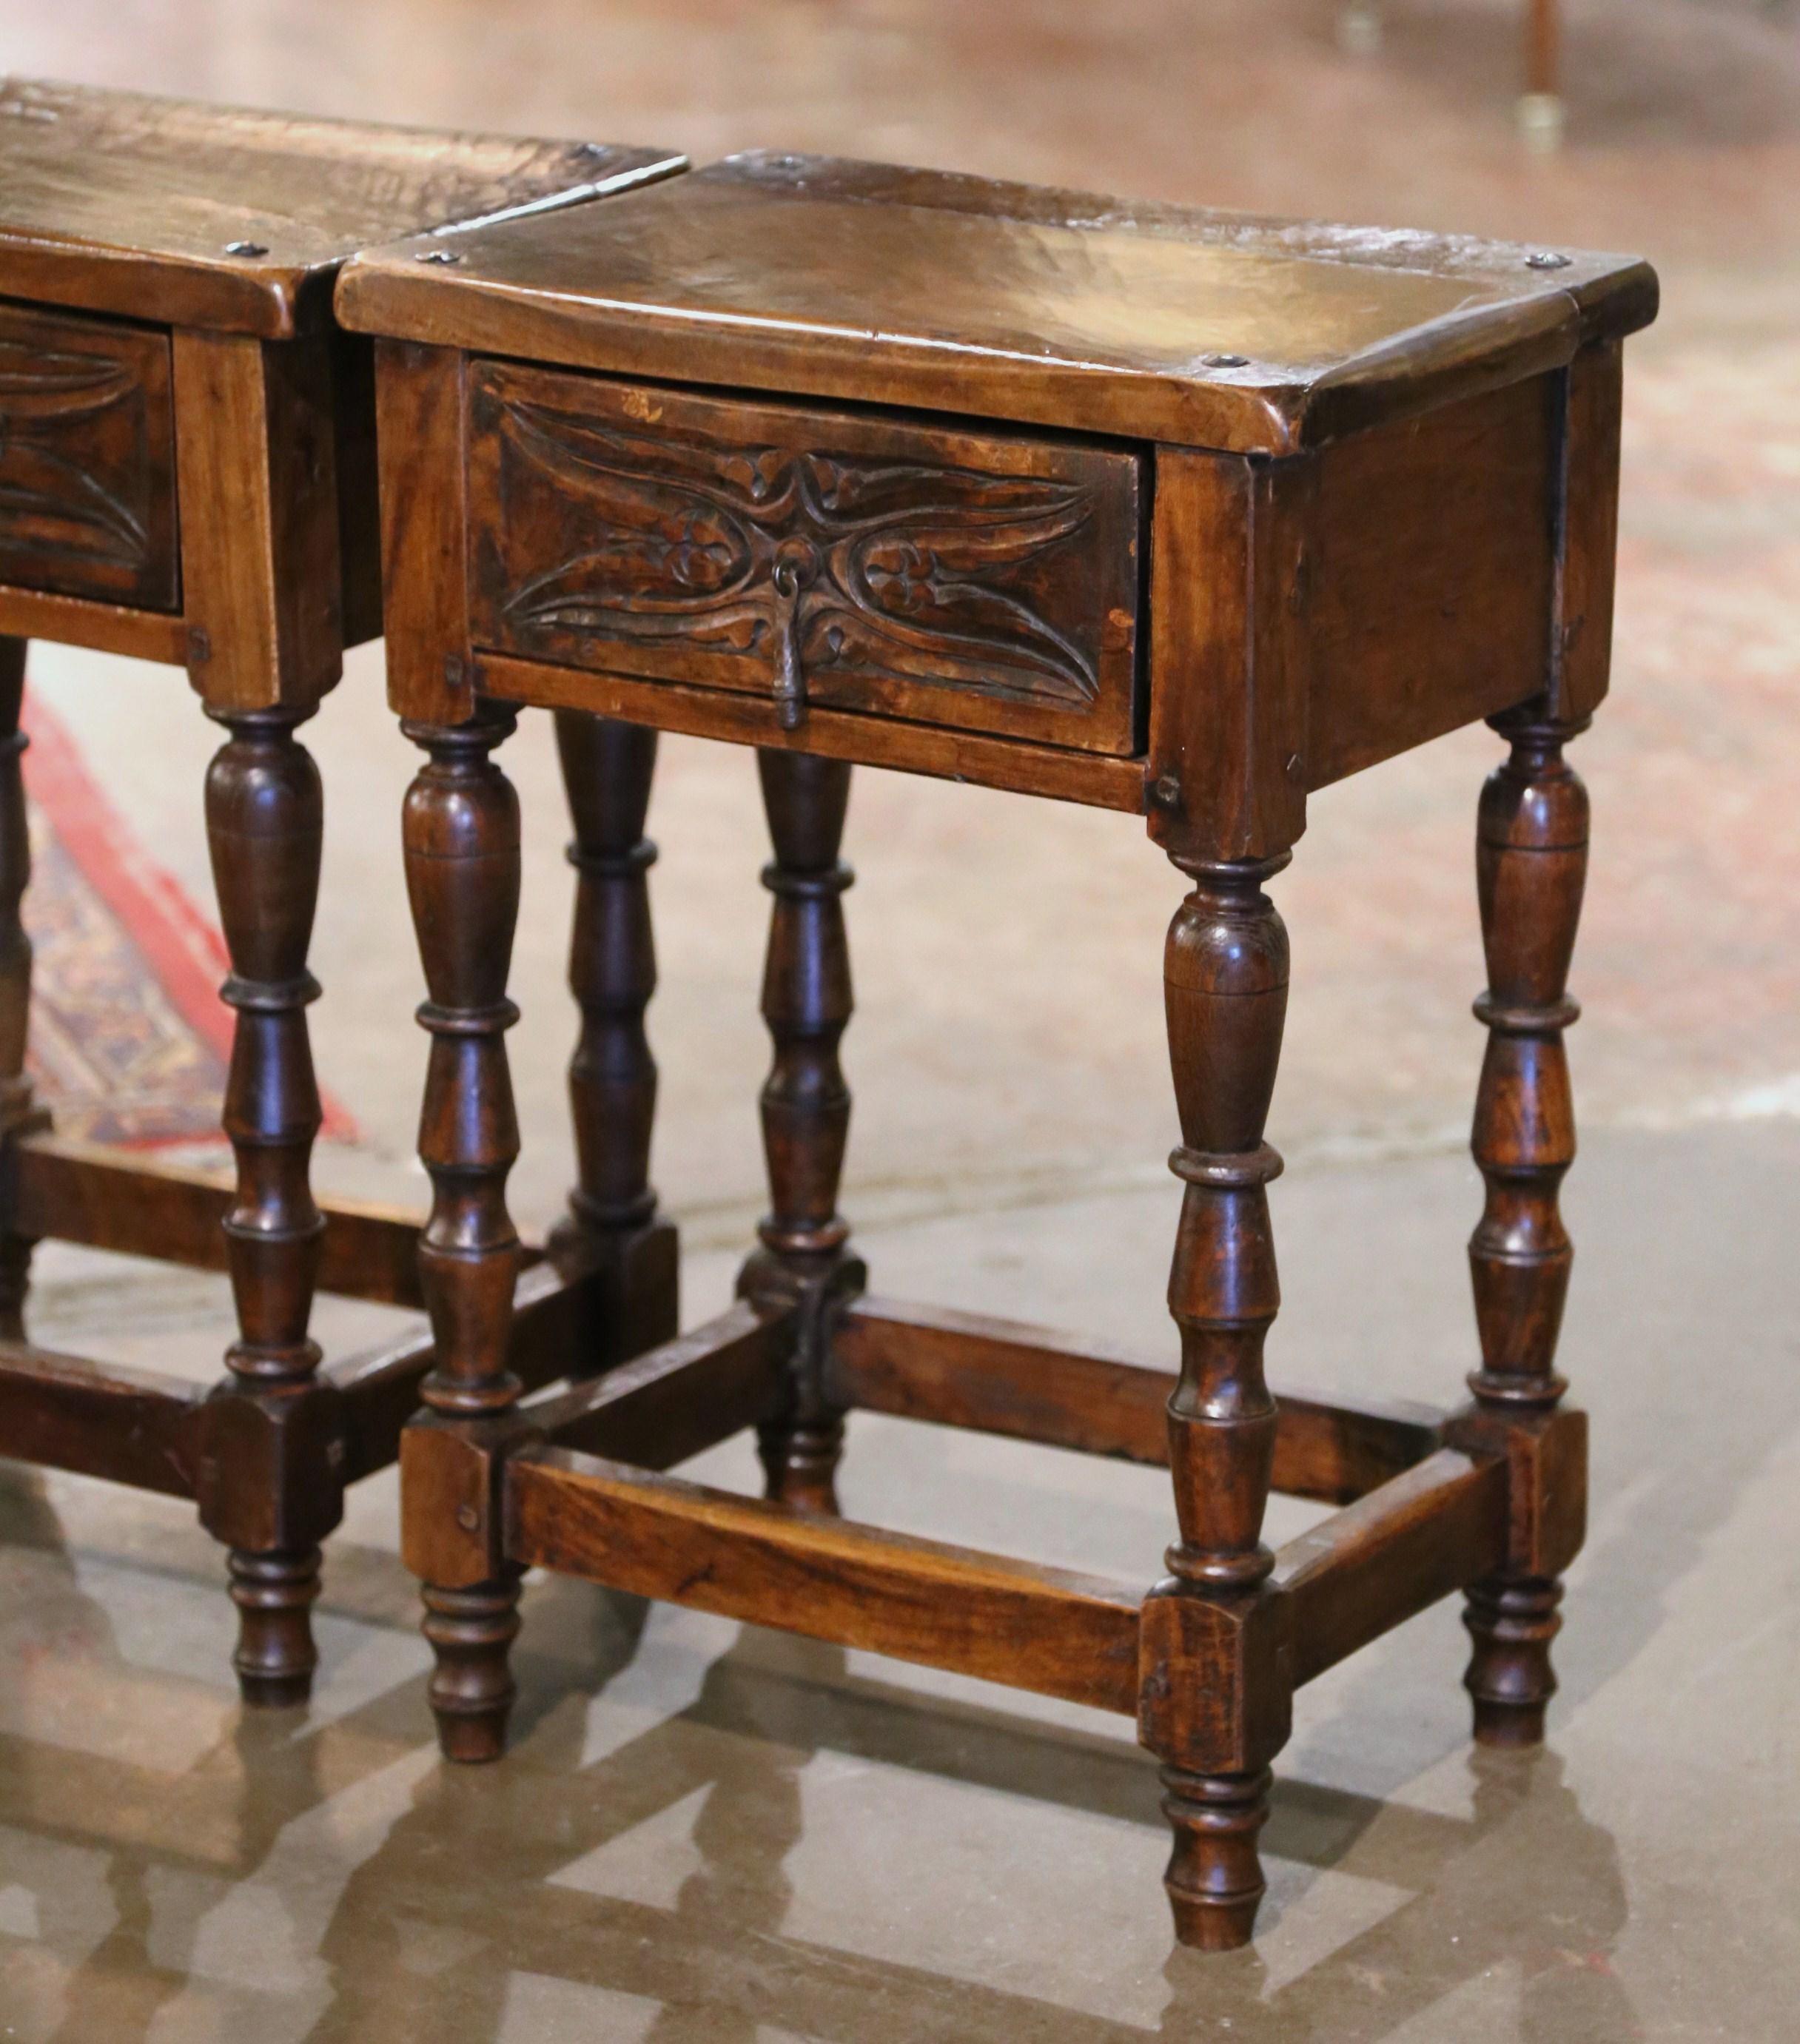 Decorate a den or a living room with this elegant pair of antique side tables. Crafted in Spain circa 1880, each table stands on turned legs joined with a bottom stretcher. The Baroque table features a center carved drawer, embellished with